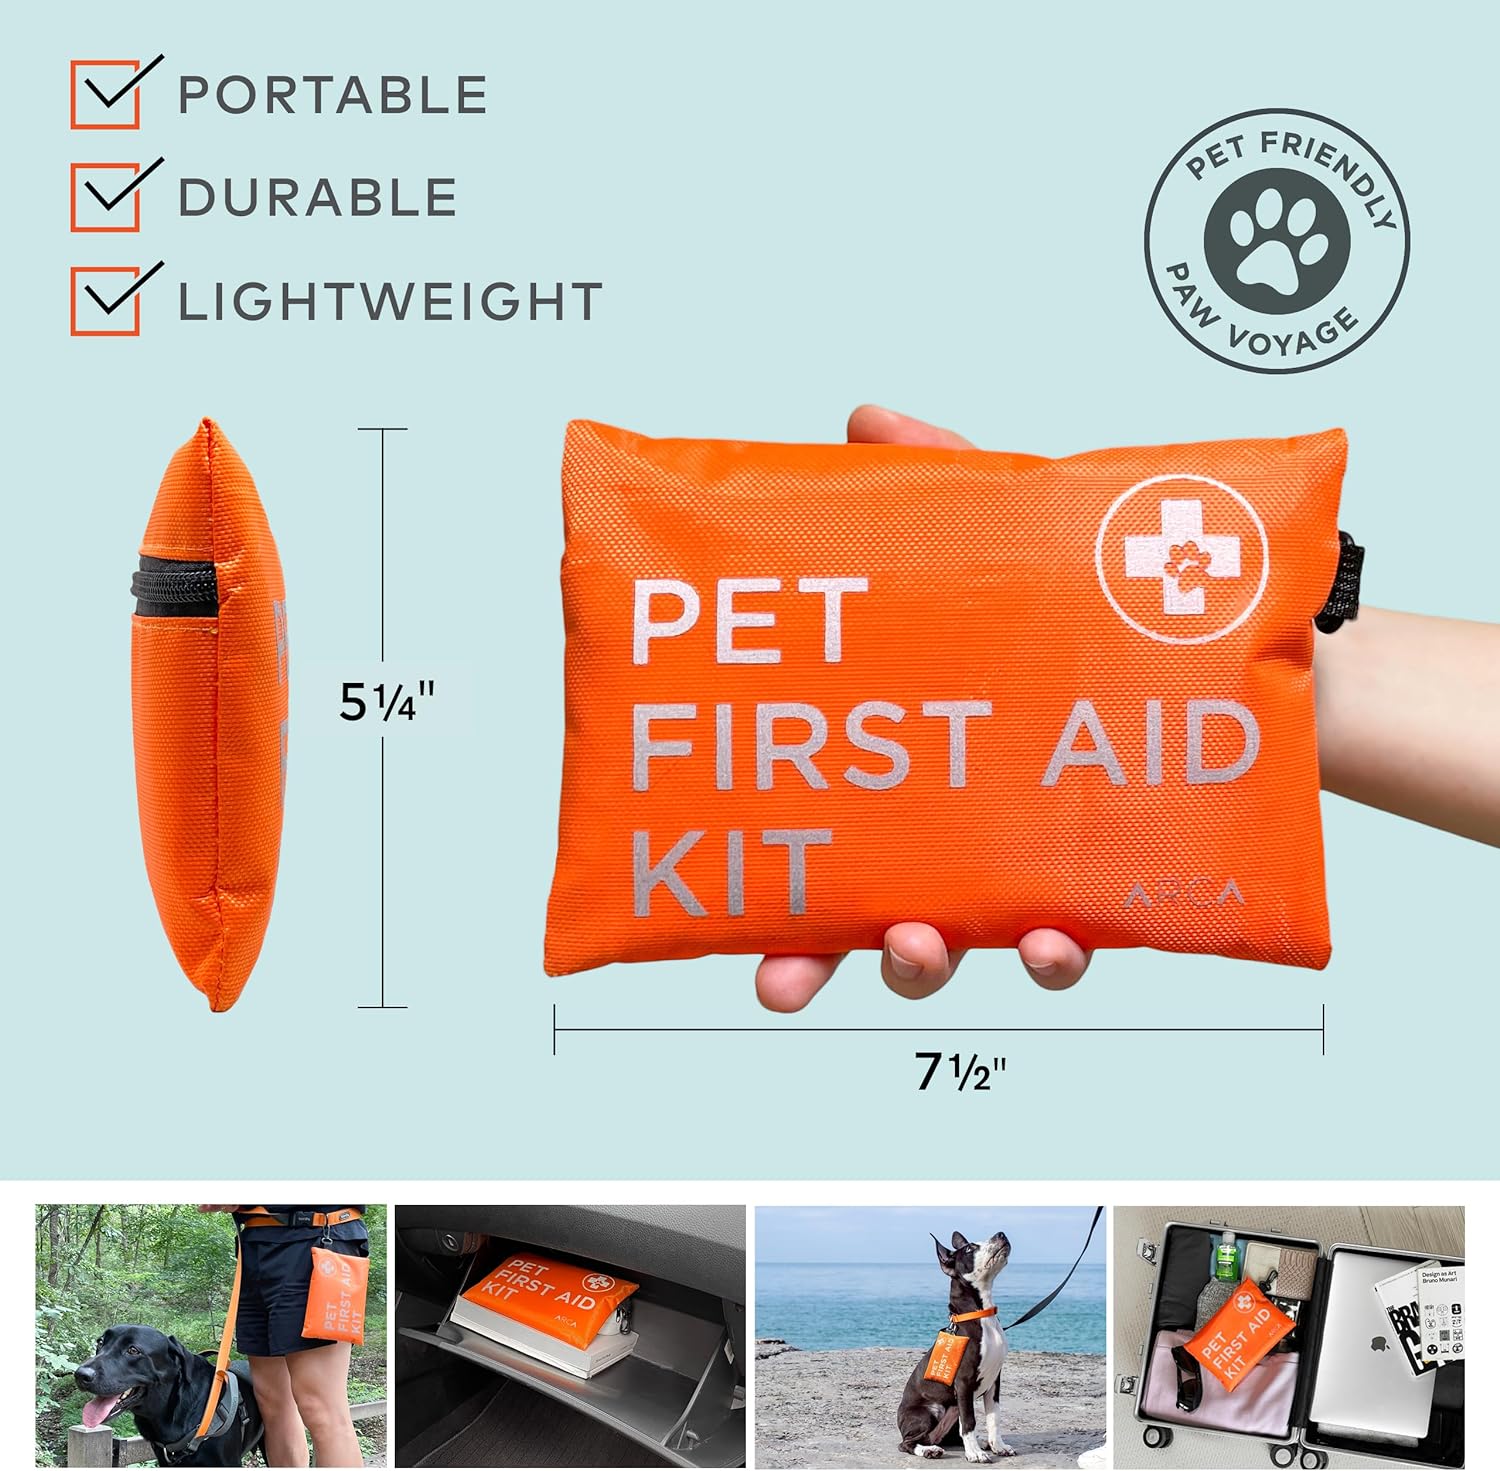 ARCA PET Dog First Aid Kit - Pet Emergency Kit Dog Travel kit for - Water Resistant High Visibility Reflective First Aid Pouch Dog Camping Essentials for Pets for Hiking, Backpacking, Sports, Hunting